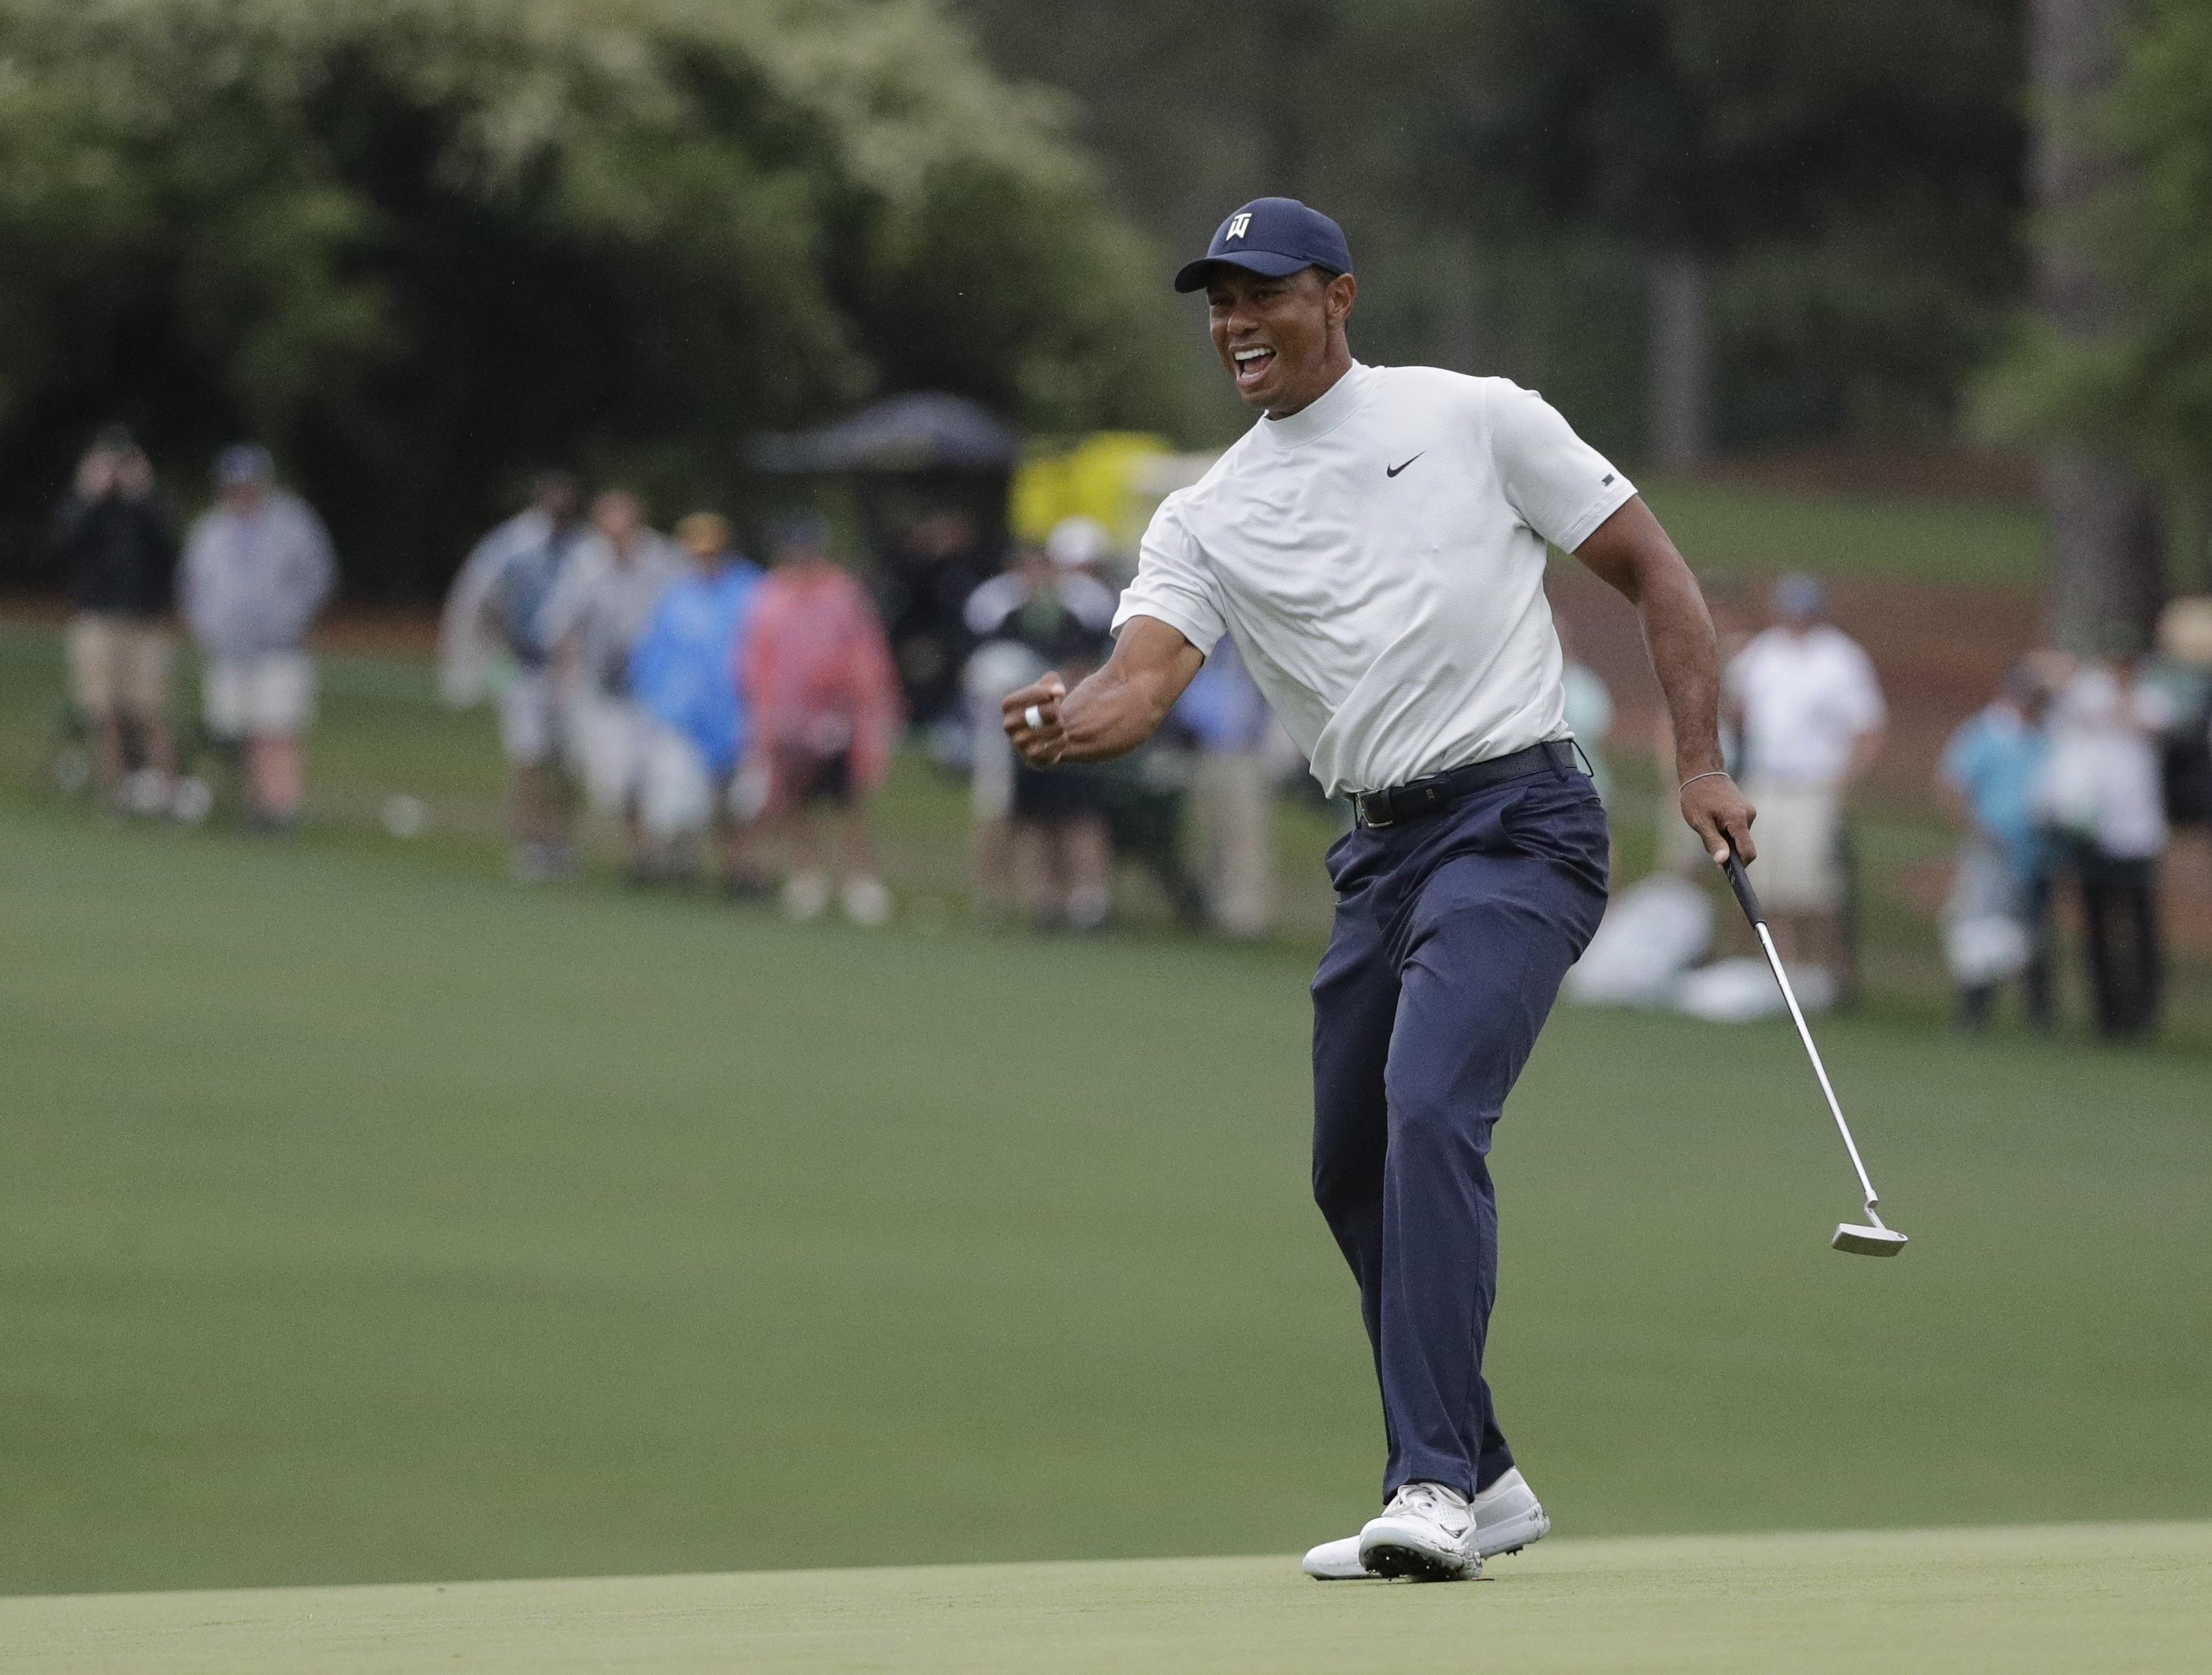 Tiger Woods makes a Masters logjam look even larger | The ...